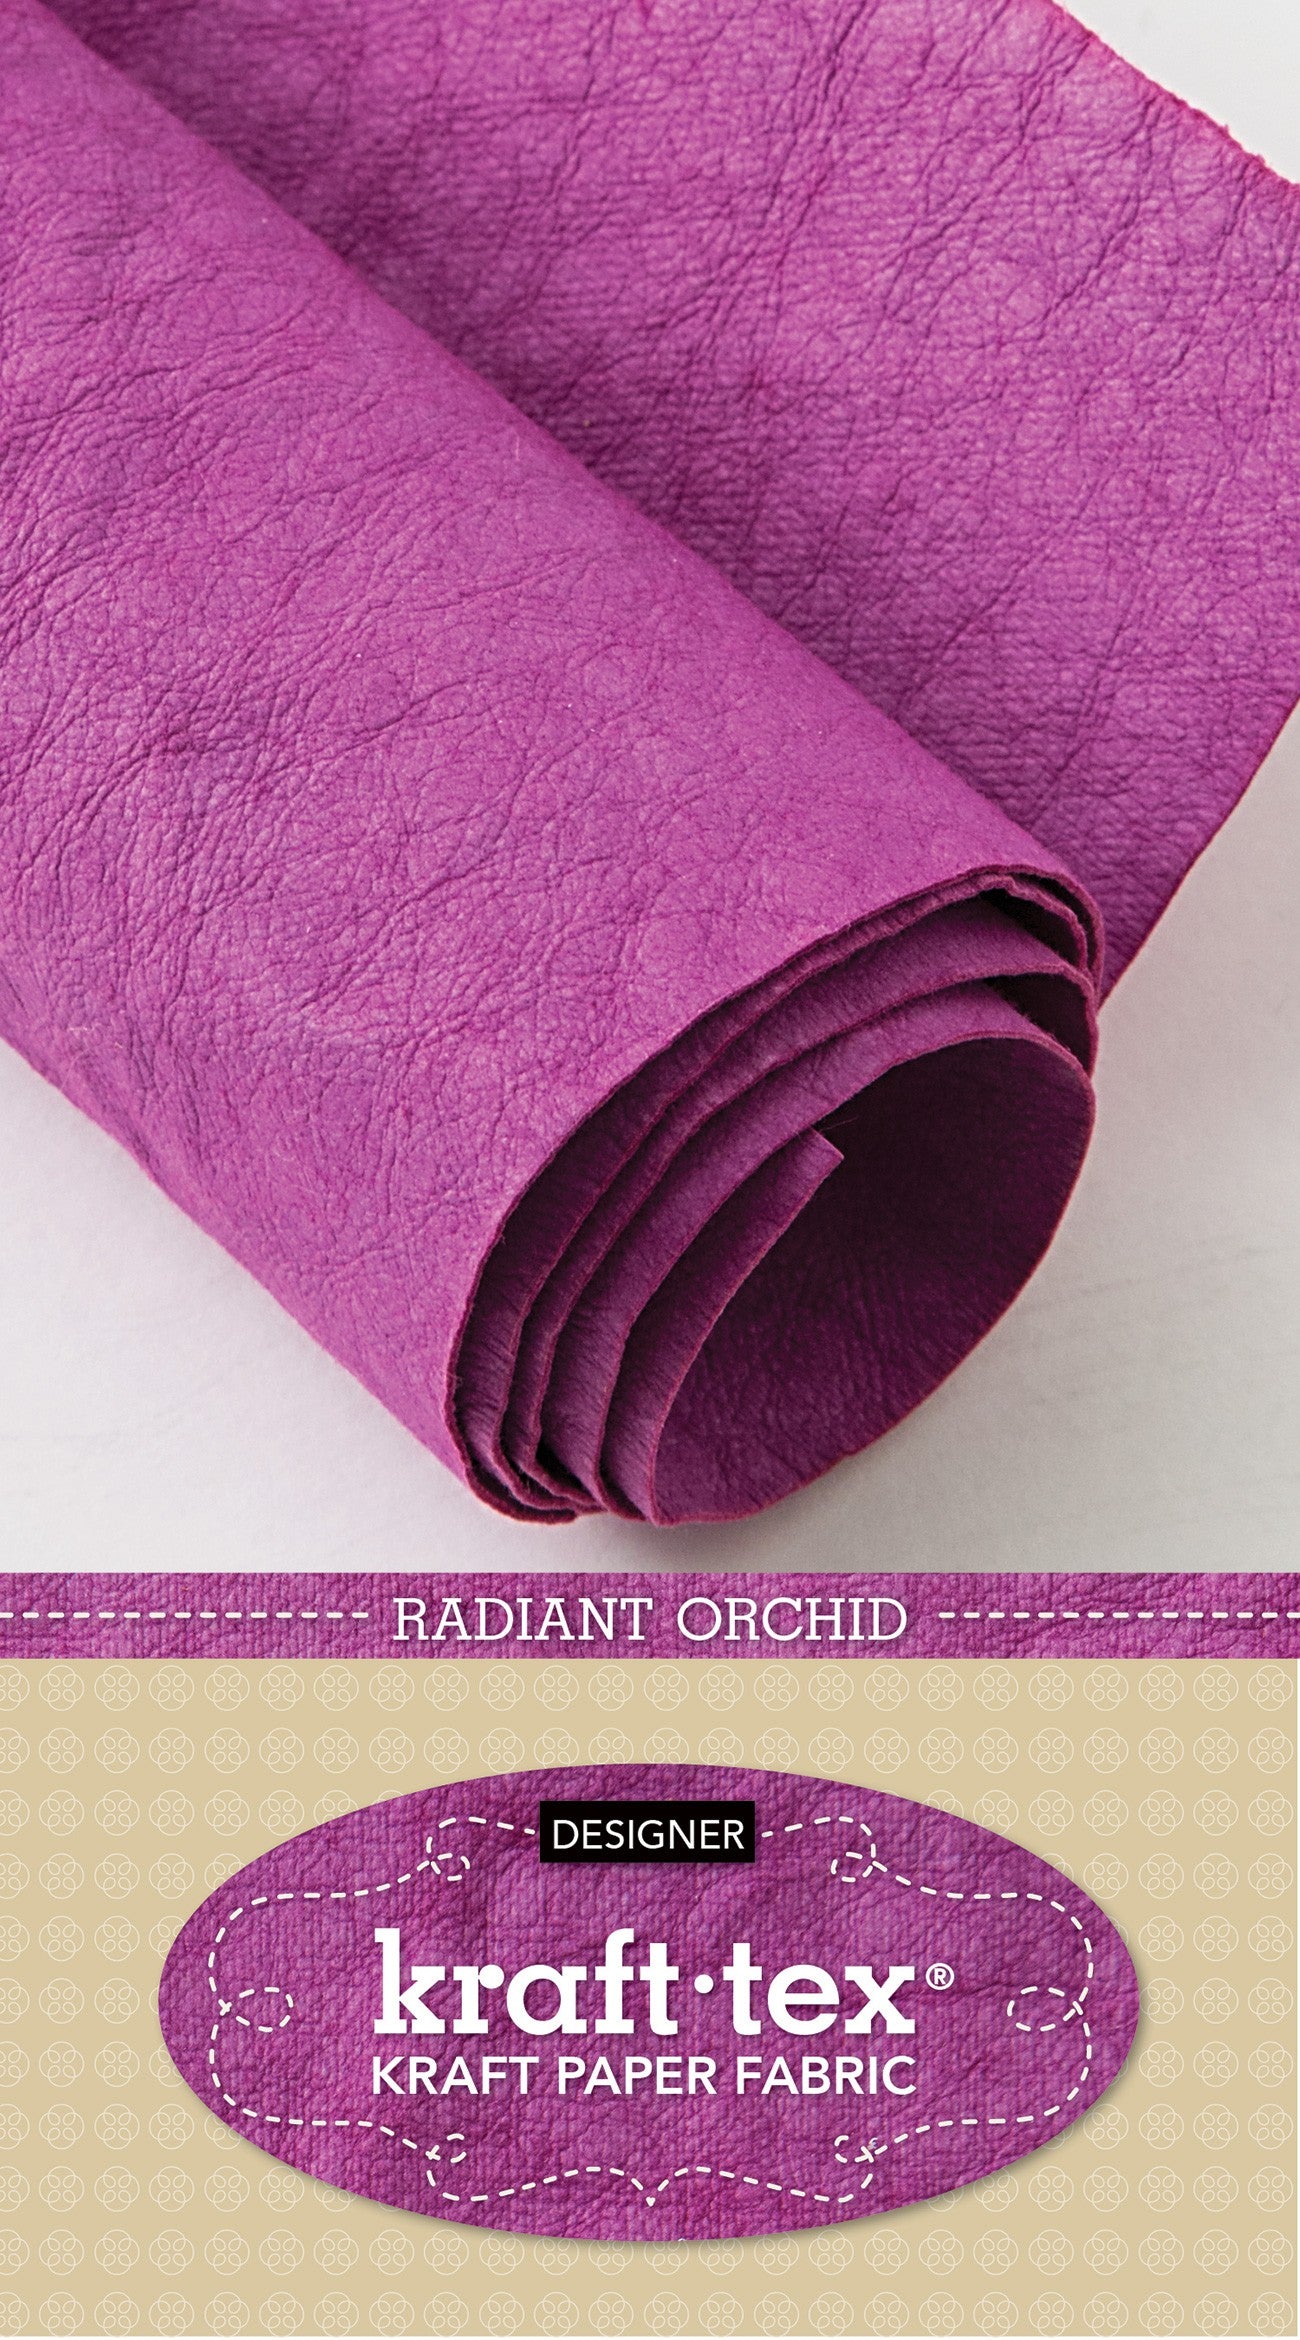 Kraft-Tex Roll, Designer Radiant Orchid, 18.5 Inches x 28.5 Inches Hand-Dyed Prewashed Paper Fabric